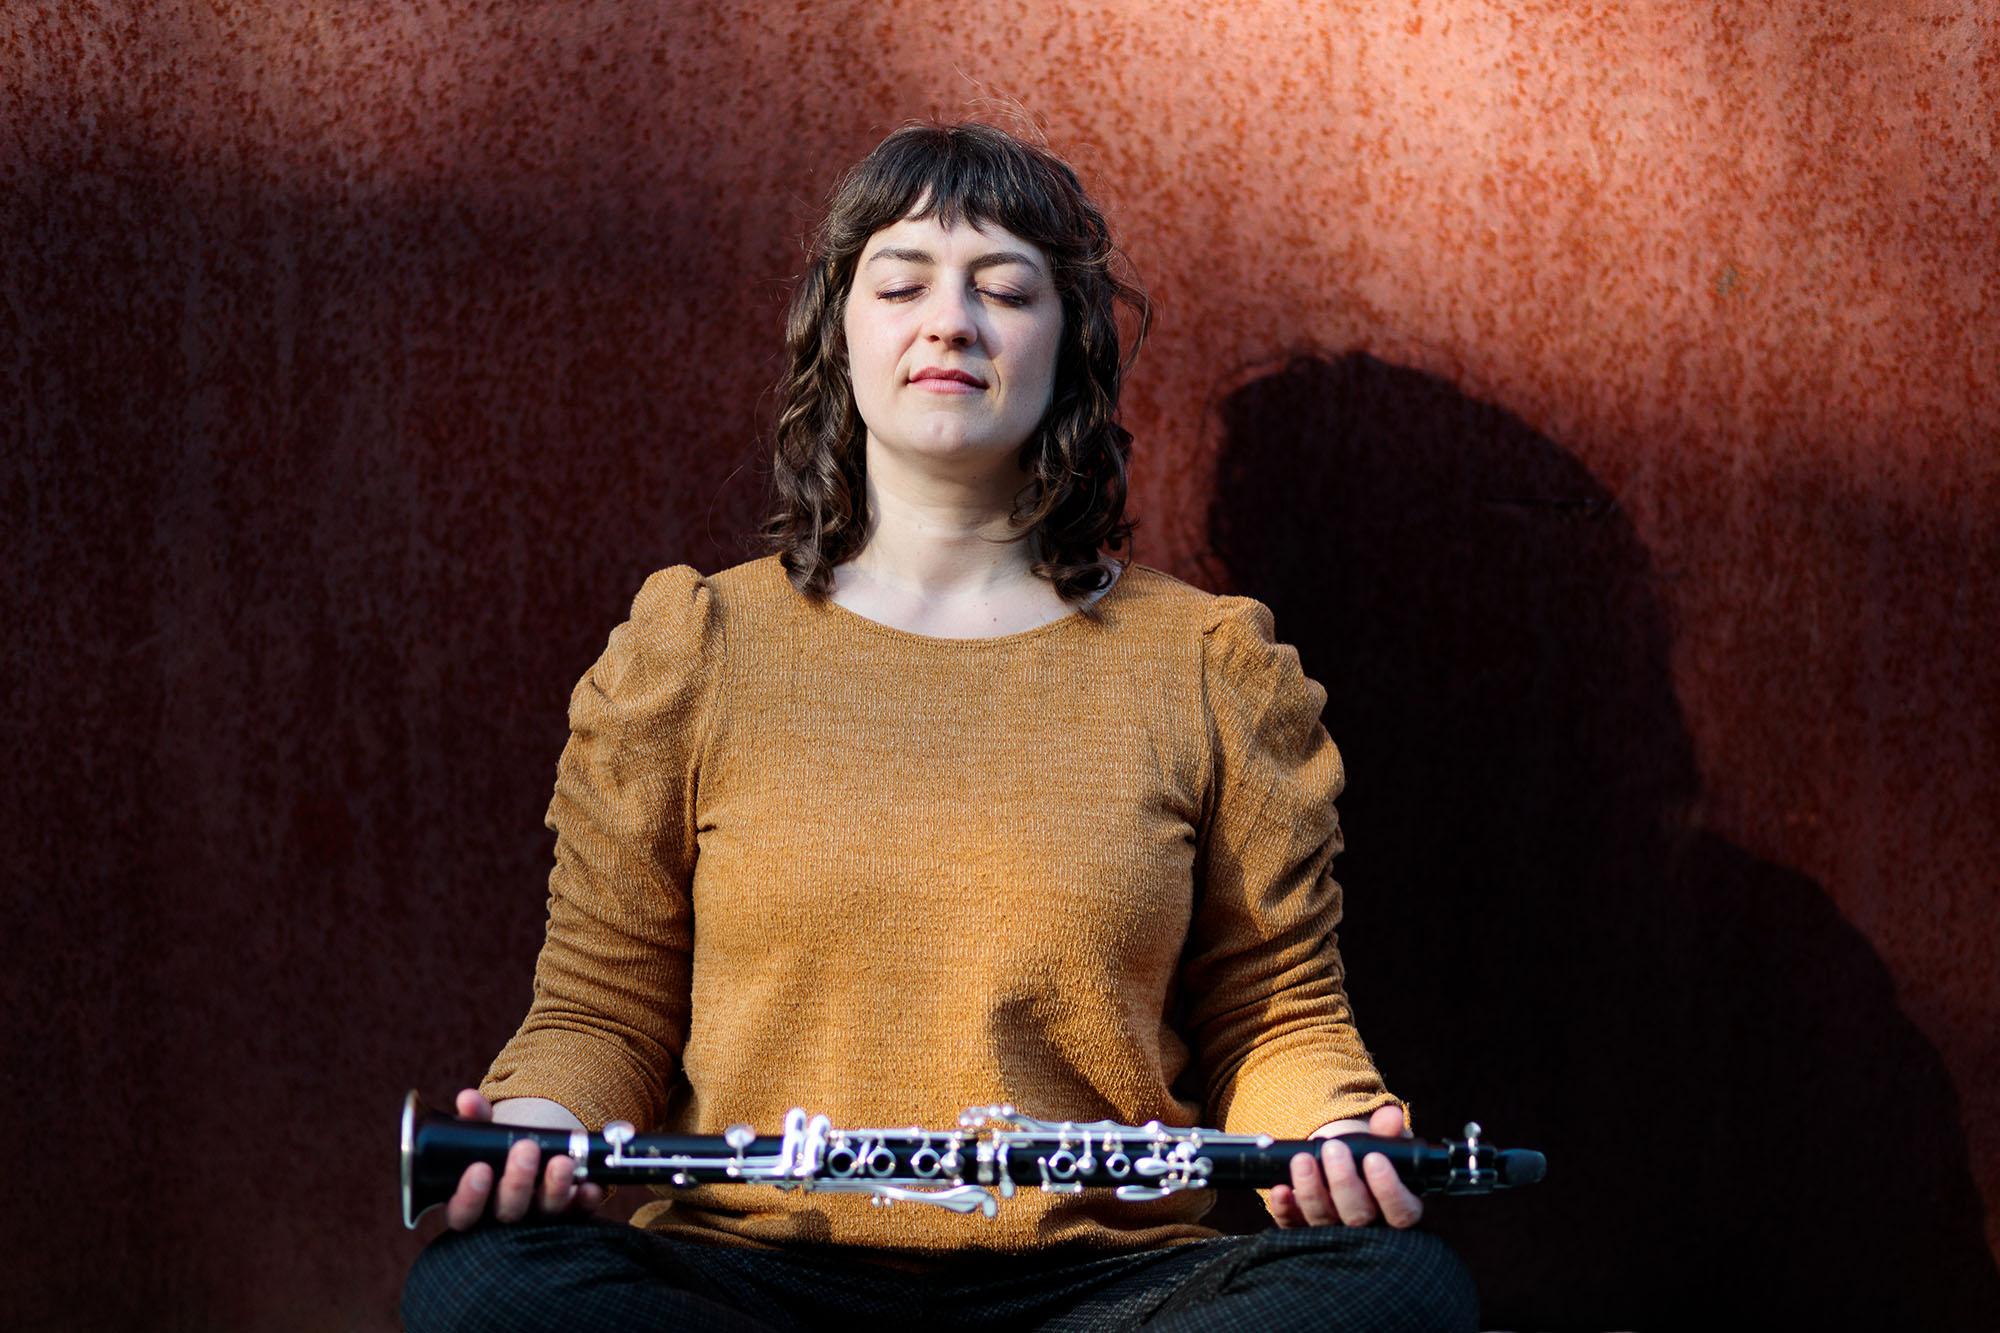 Rachel Yoder assumes a meditative pose with eyes closed, holding a clarinet horizontally across both open palms